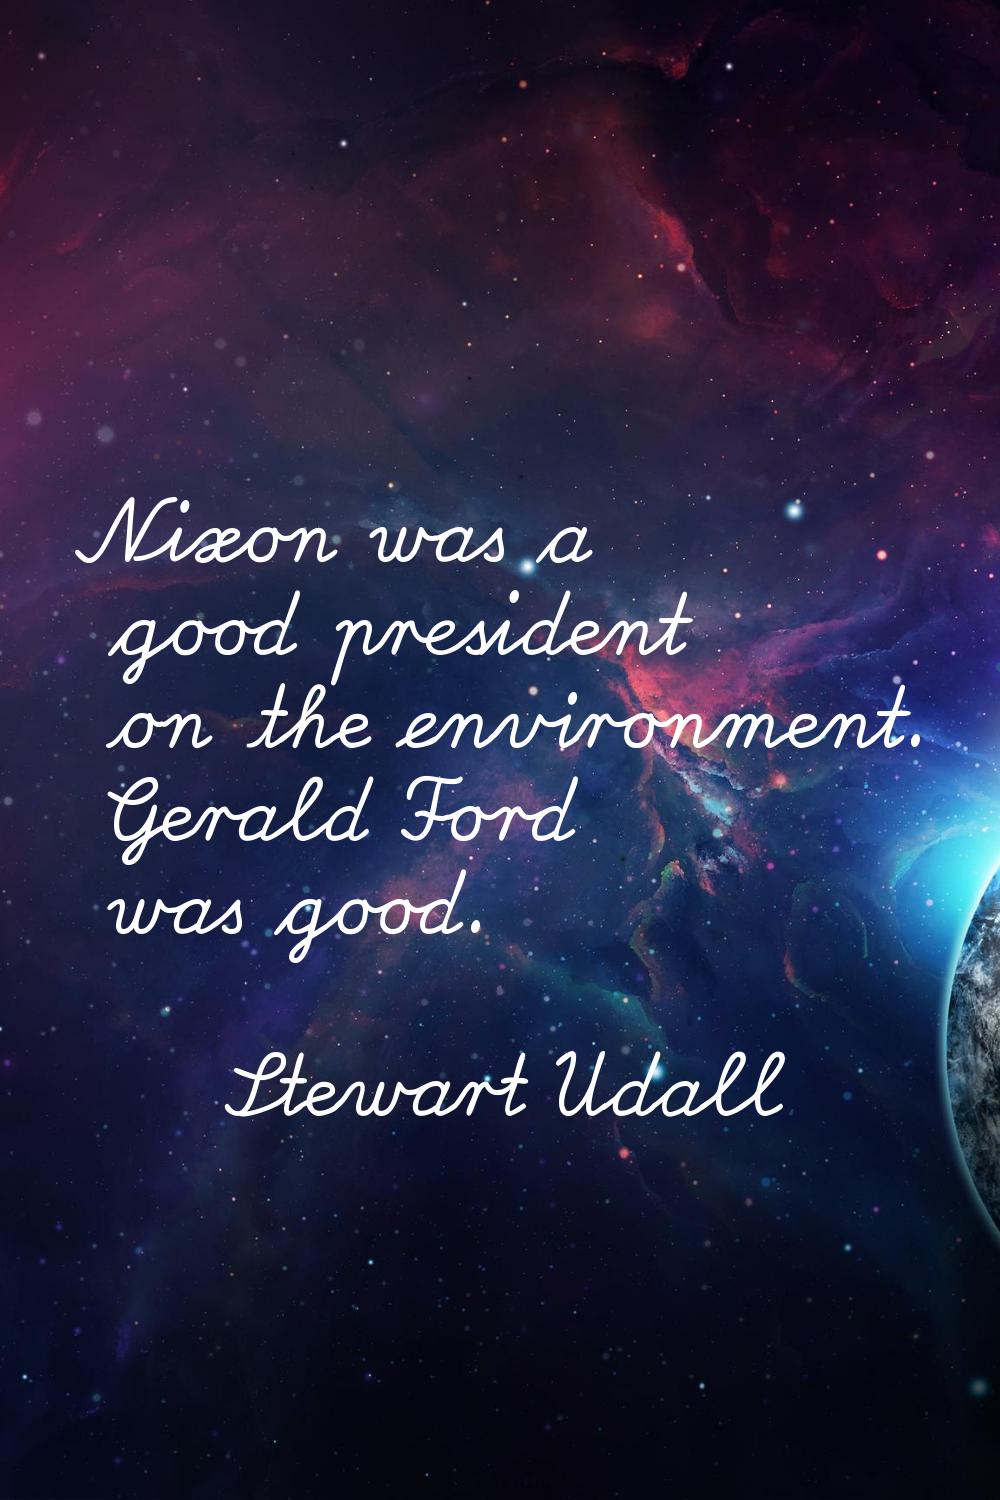 Nixon was a good president on the environment. Gerald Ford was good.